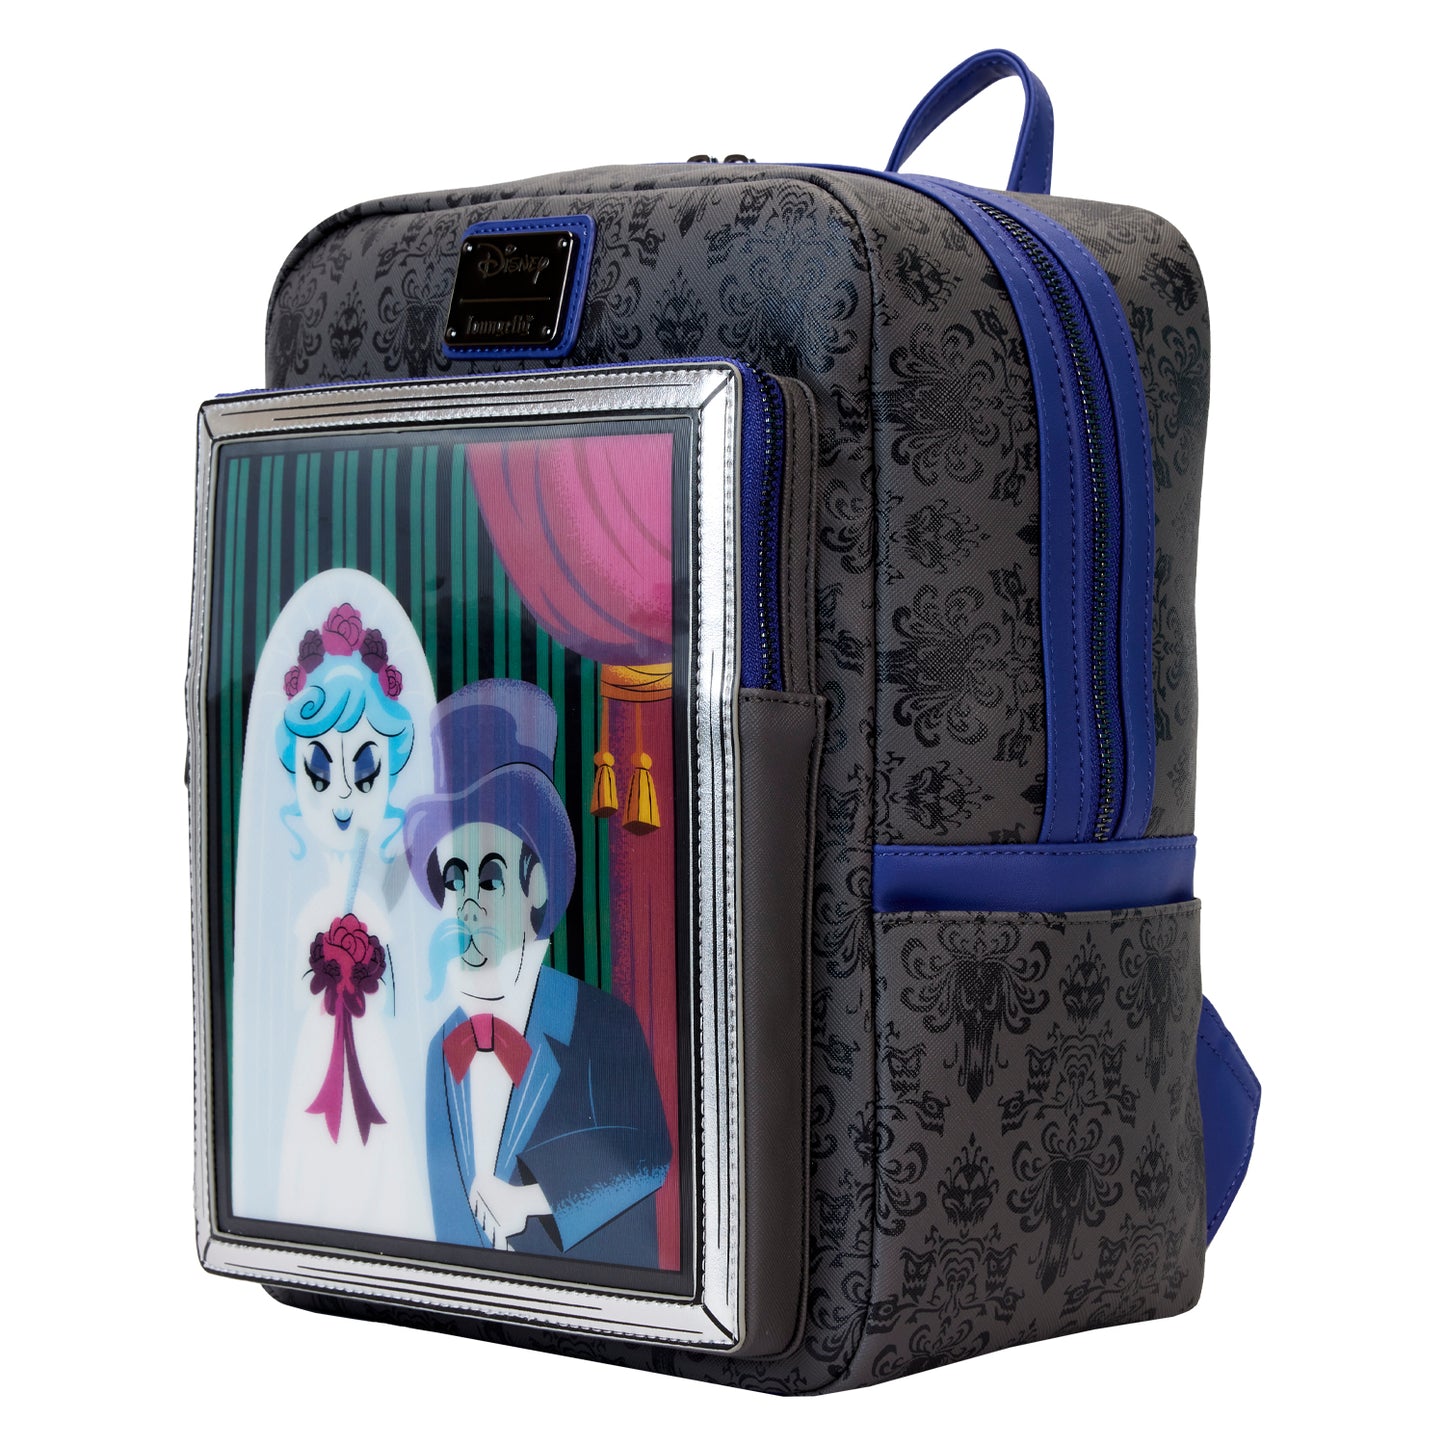 Haunted Mansion The Black Widow Bride Portrait Lenticular Mini Backpack LFY